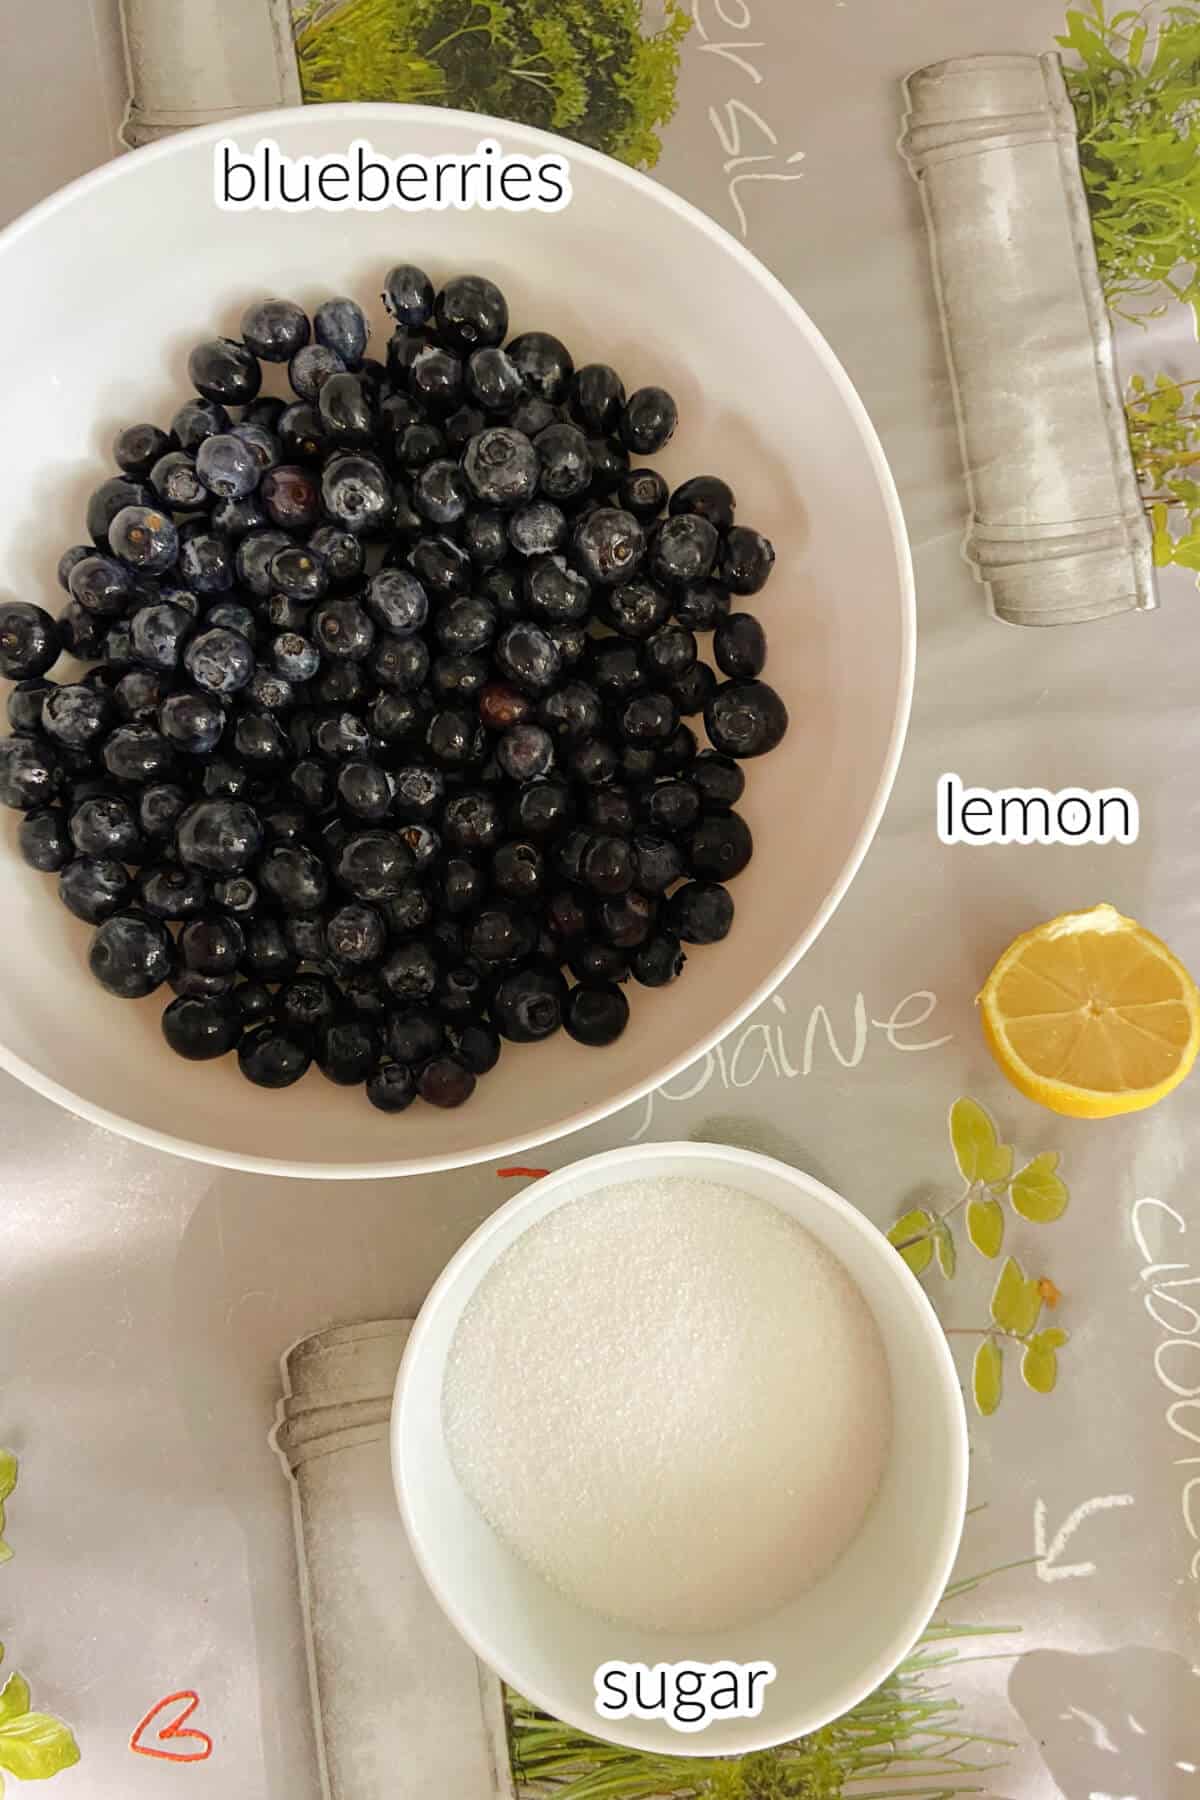 Ingredients used to make blueberry jam.